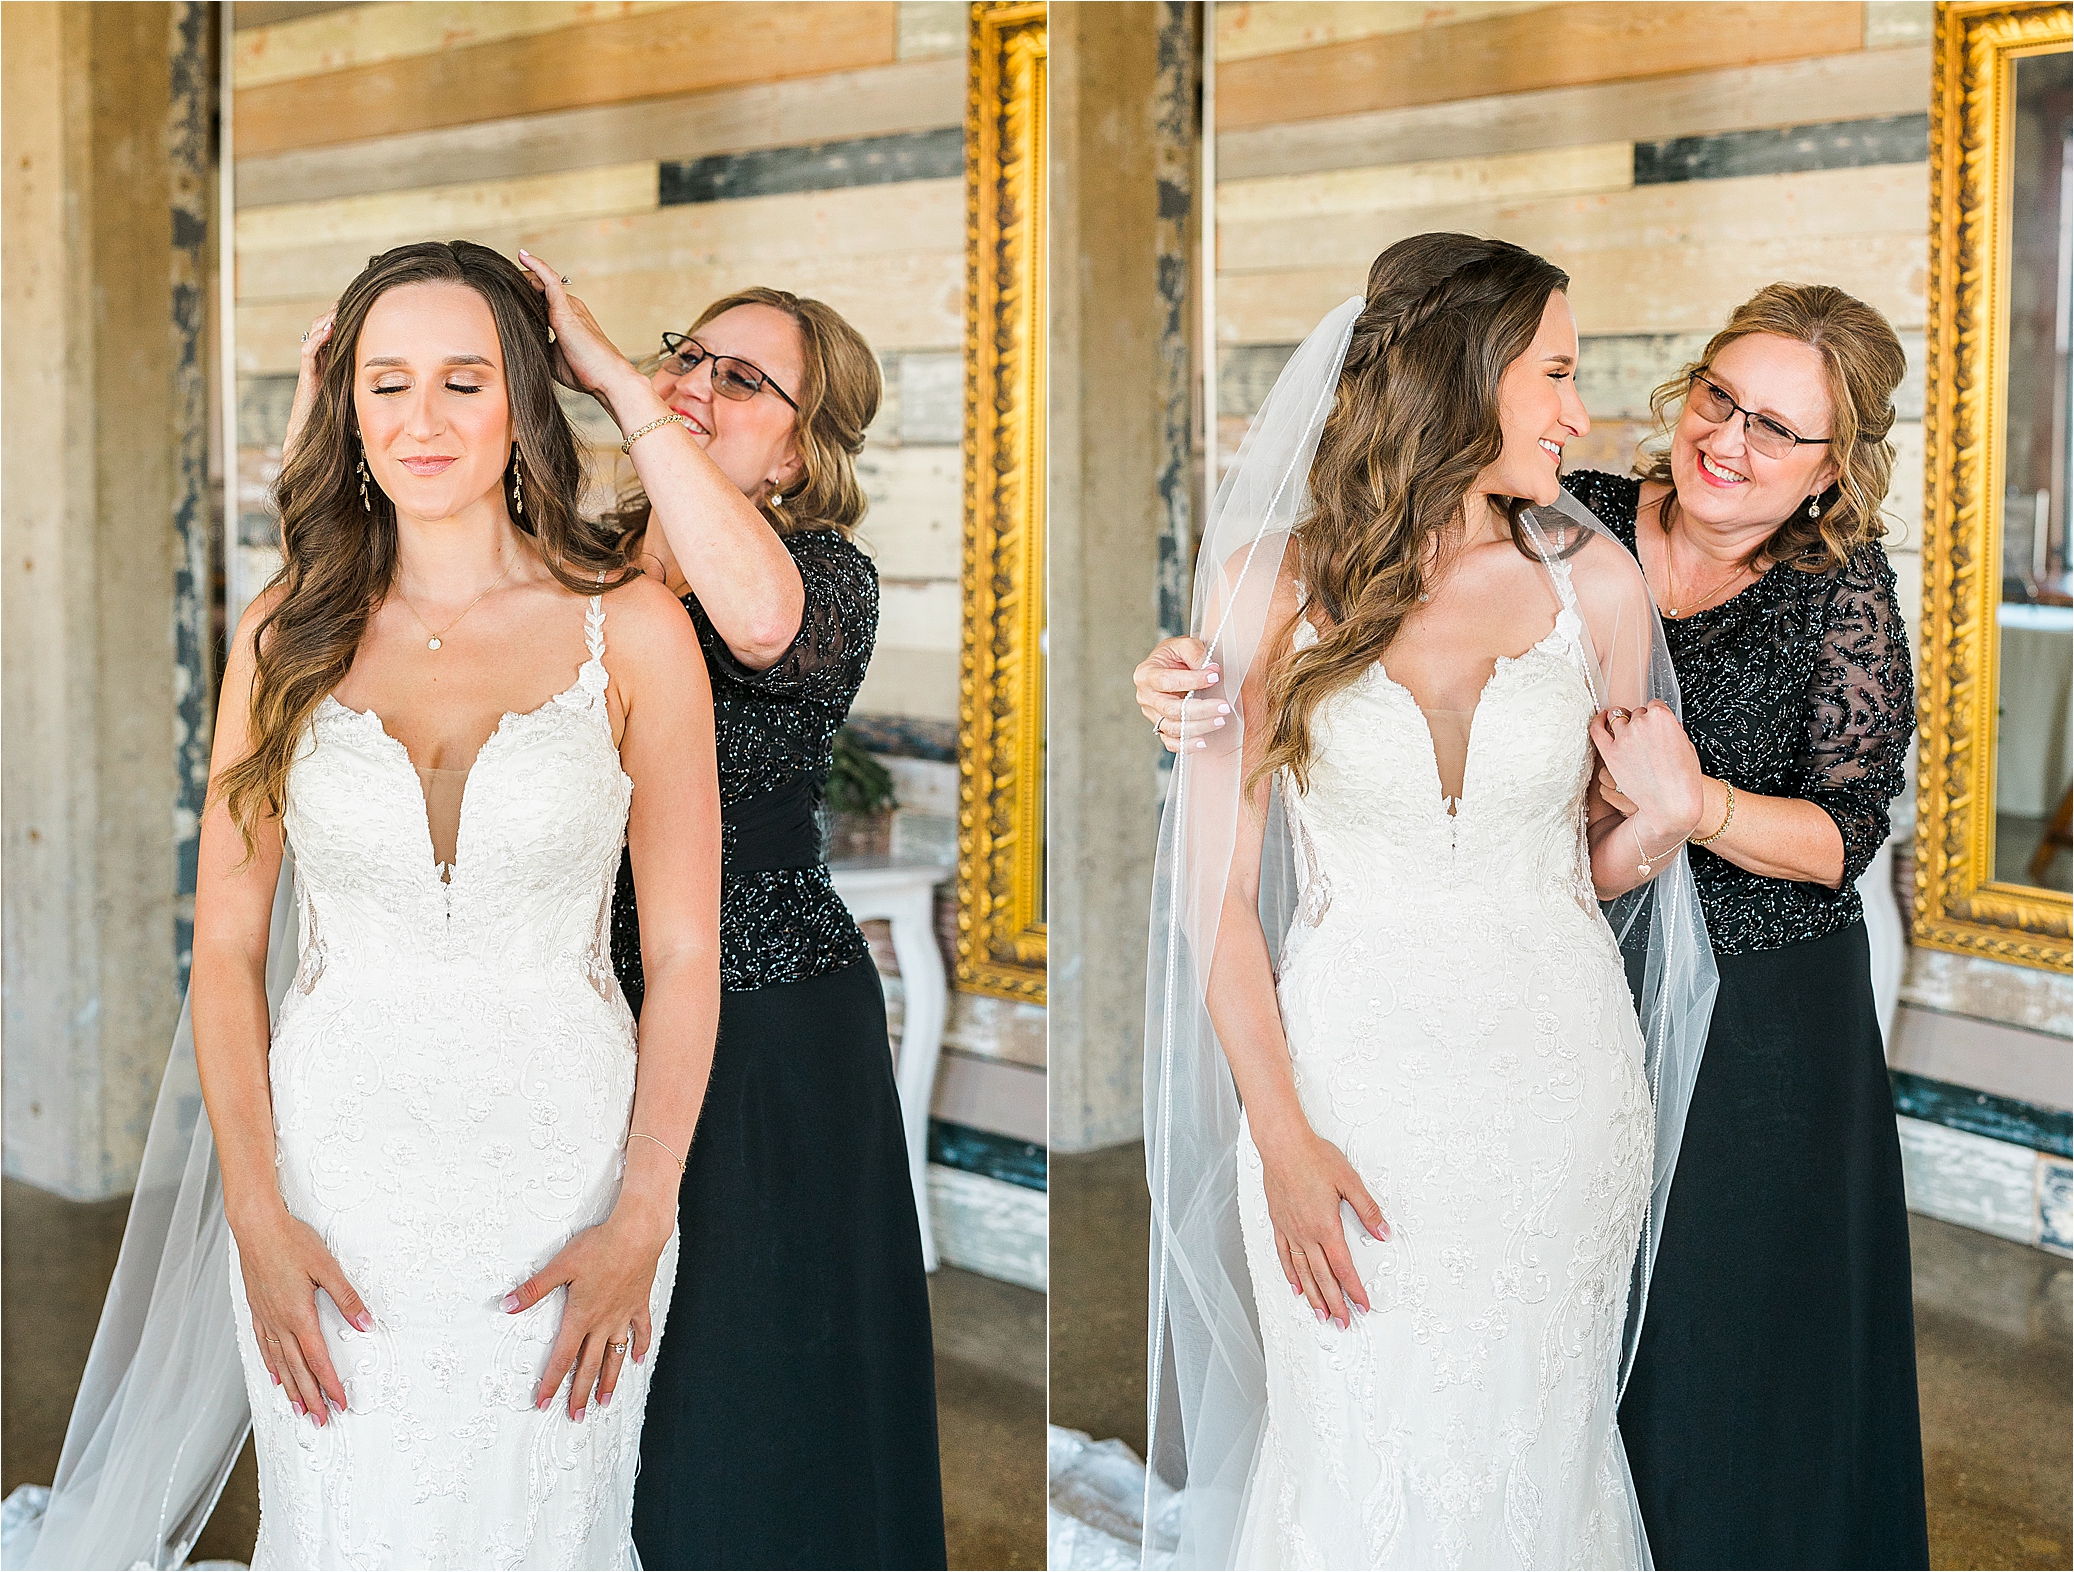 A mother of the bride puts on her daughter's veil and they look at each other and smile in the bridal suite of Hickory Street Annex in Dallas, Texas